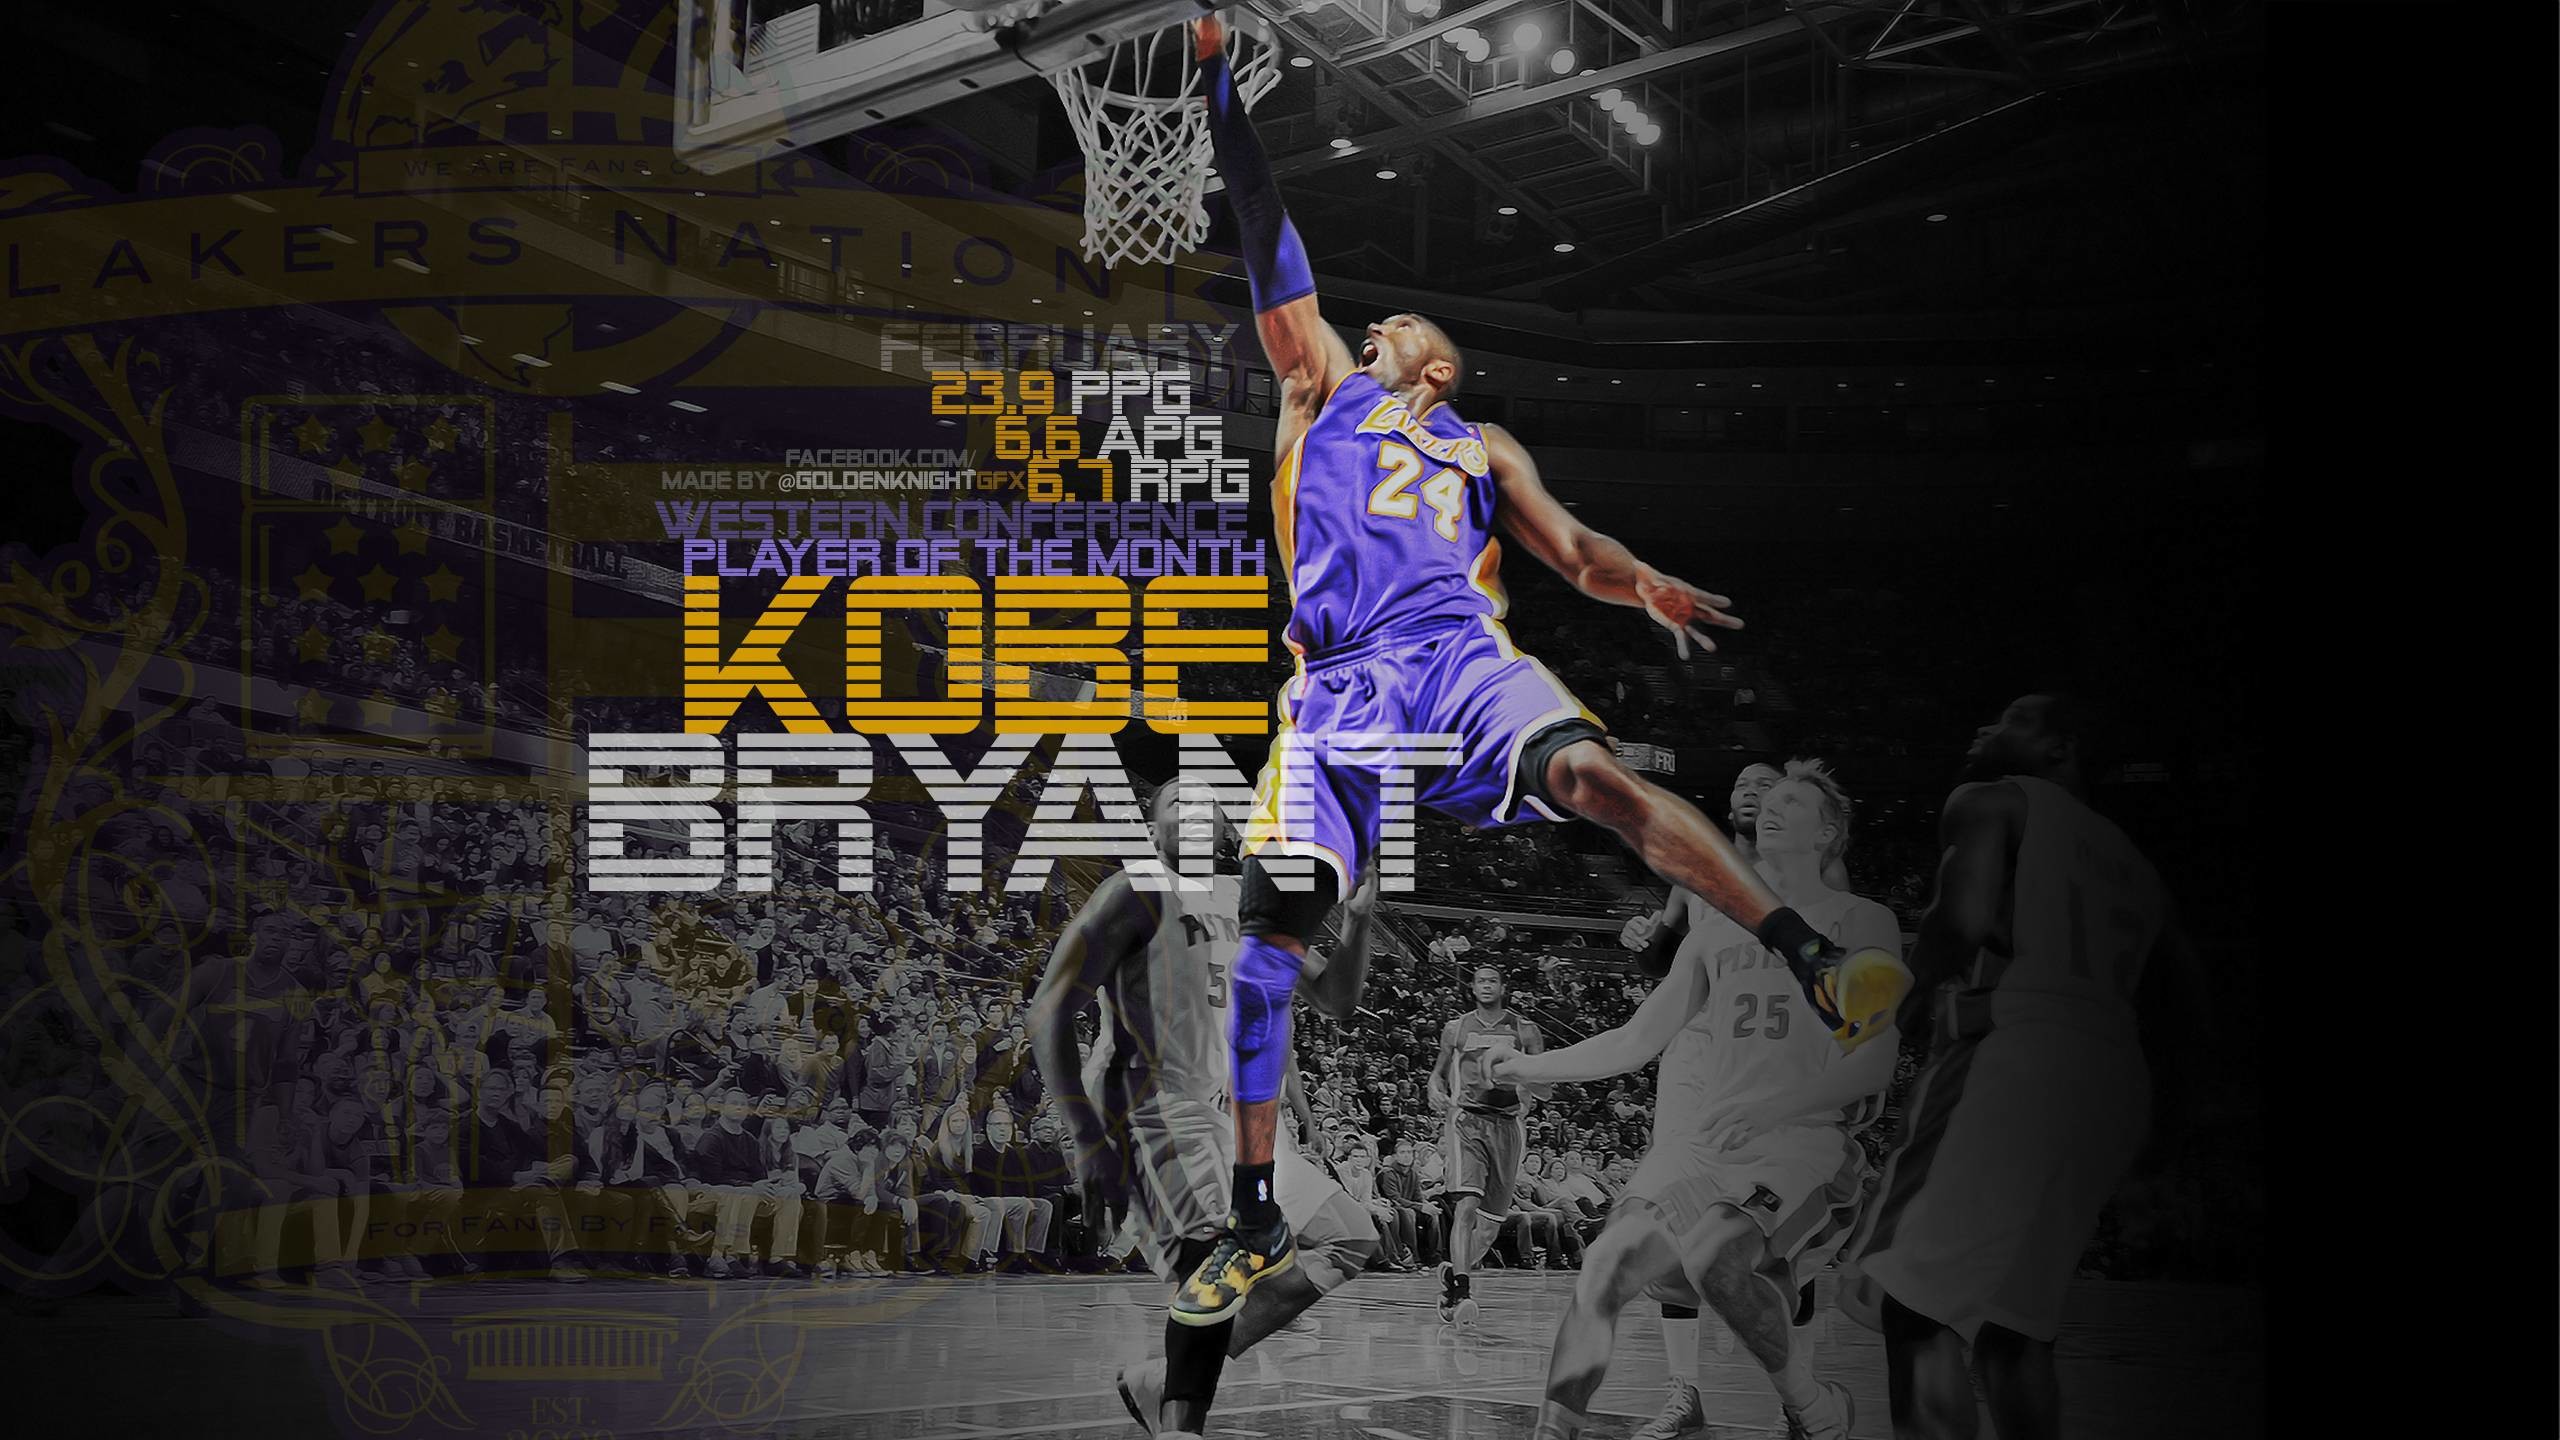 2560x1440 Lakers Wallpaper: Kobe Bryant Wins Western Player of the Month .